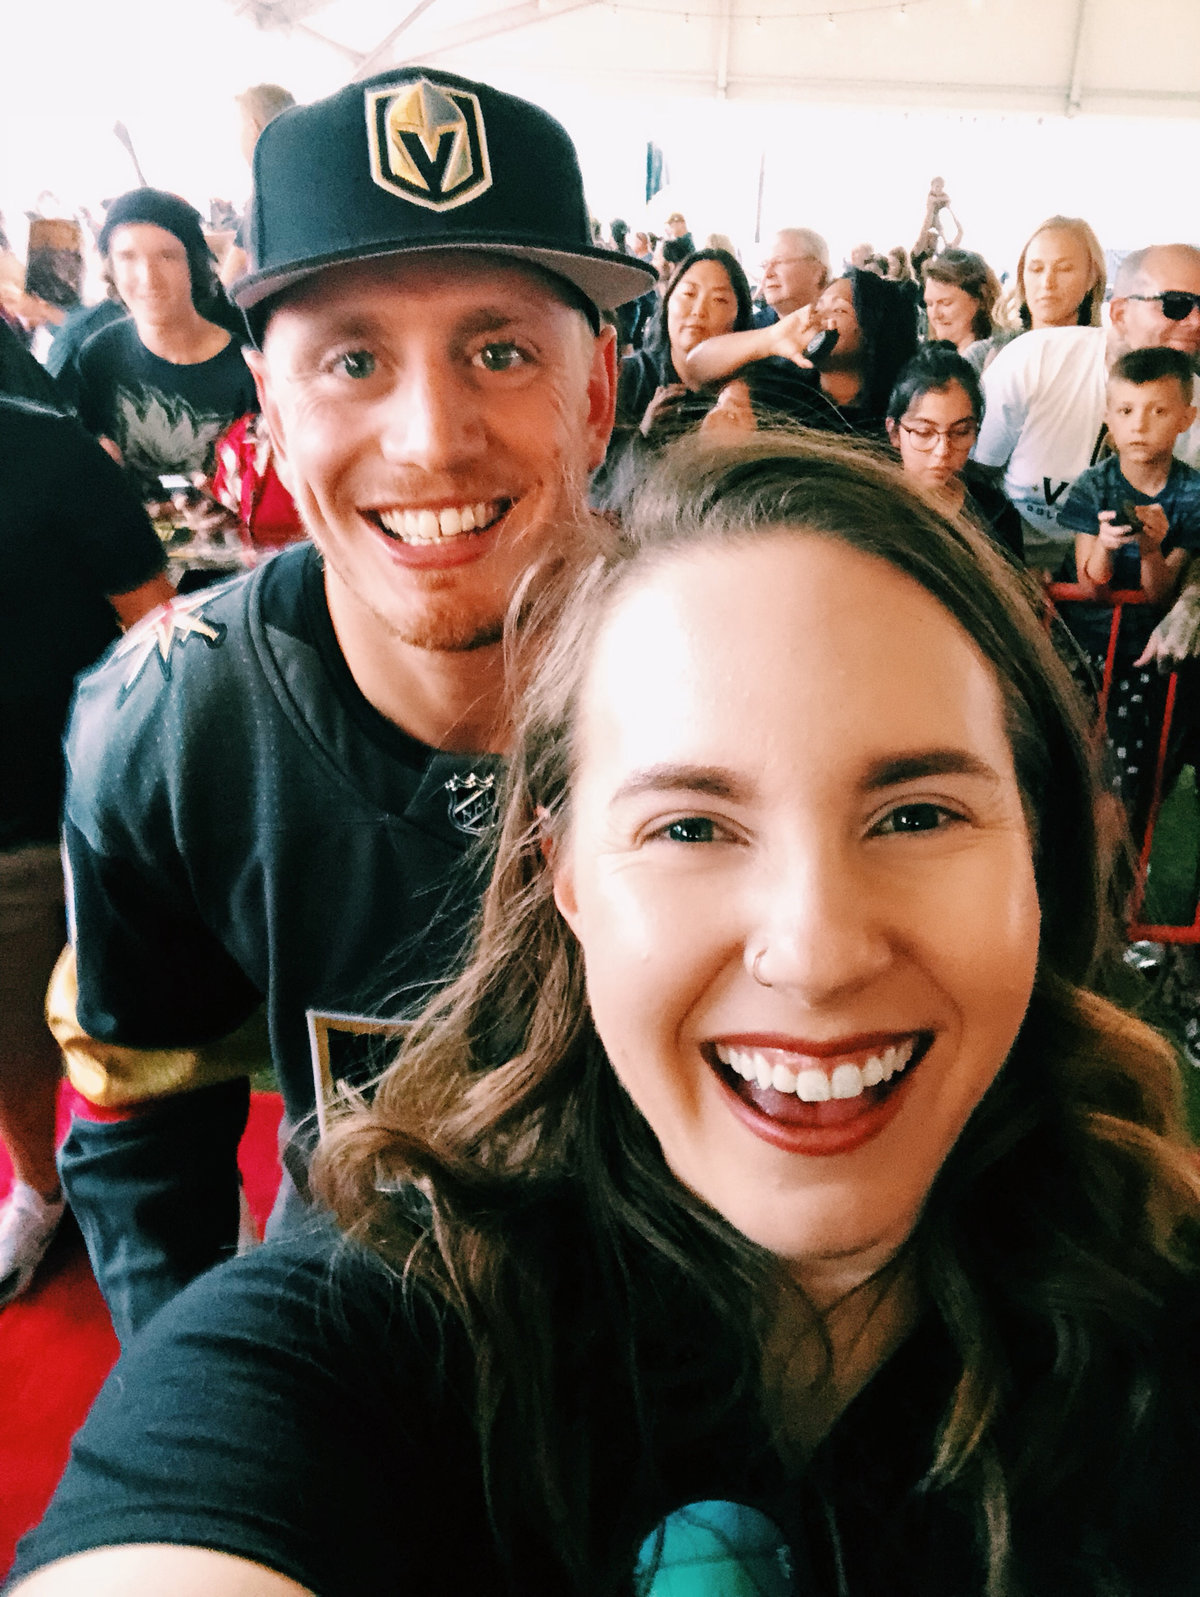 Fan poses with Nate Schmidt of the Vegas Golden Knights